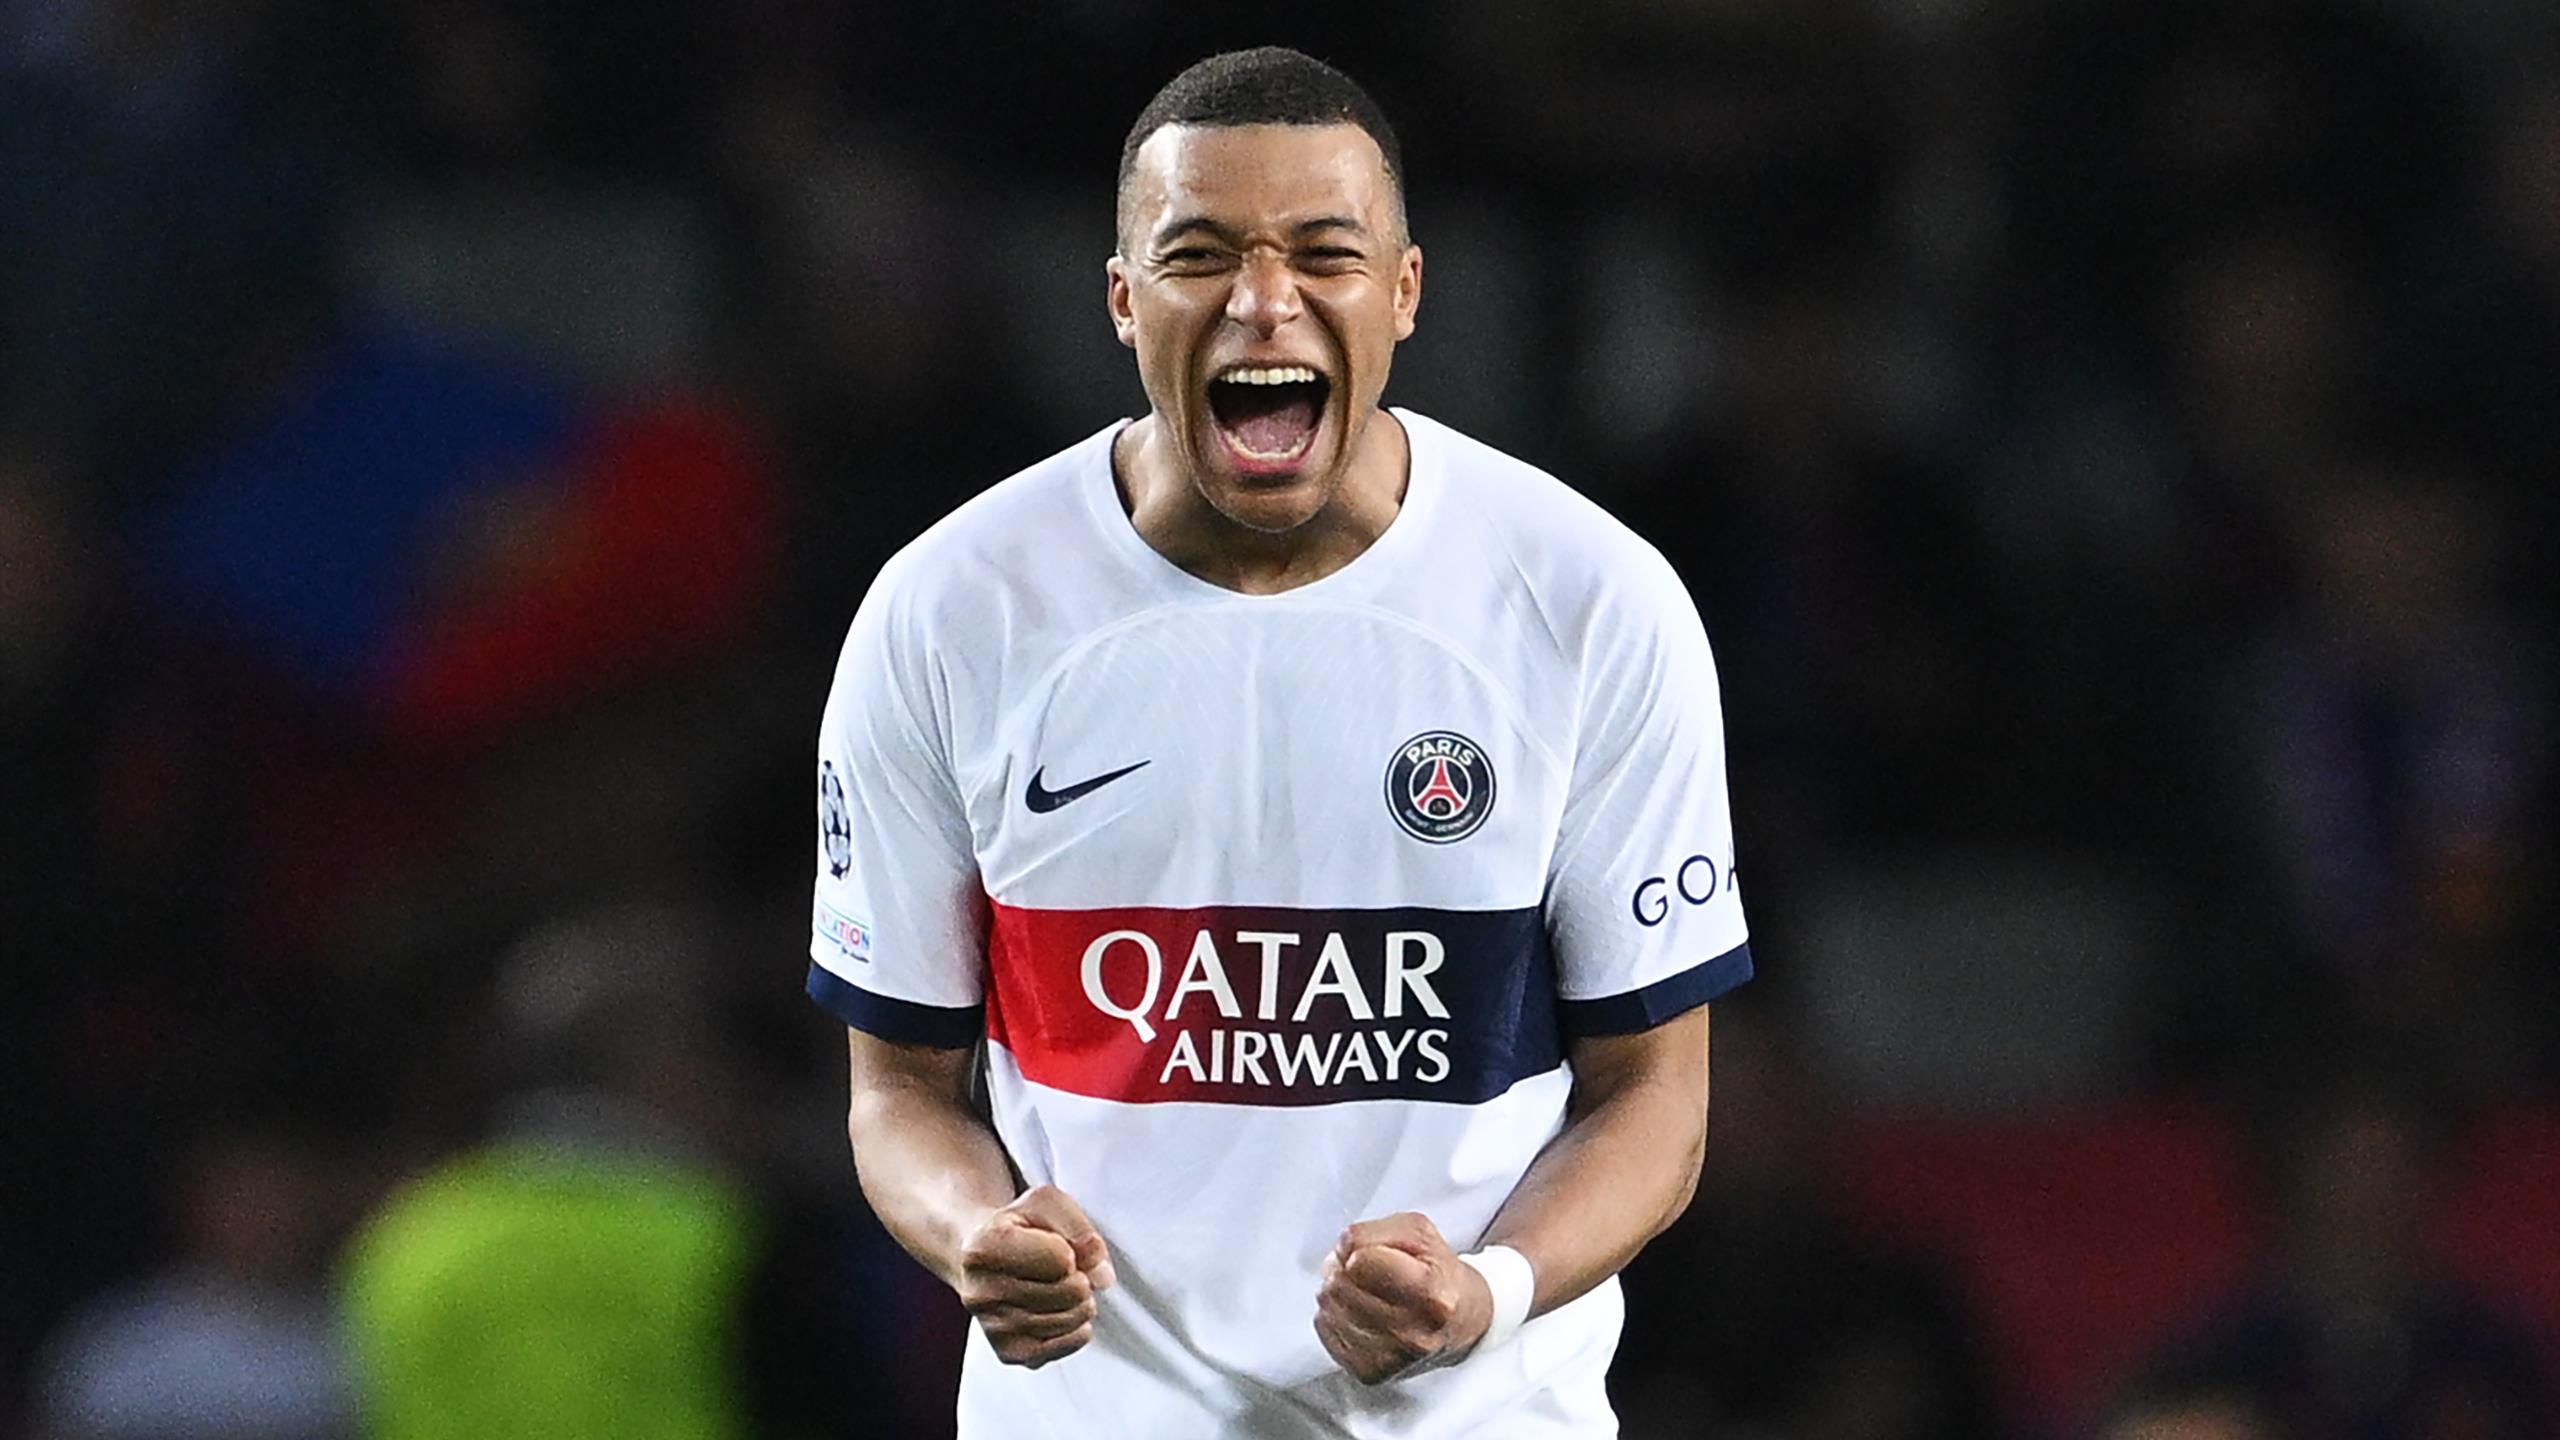 Mbappe 'proud to be in this team' after PSG victory over Barcelona 2